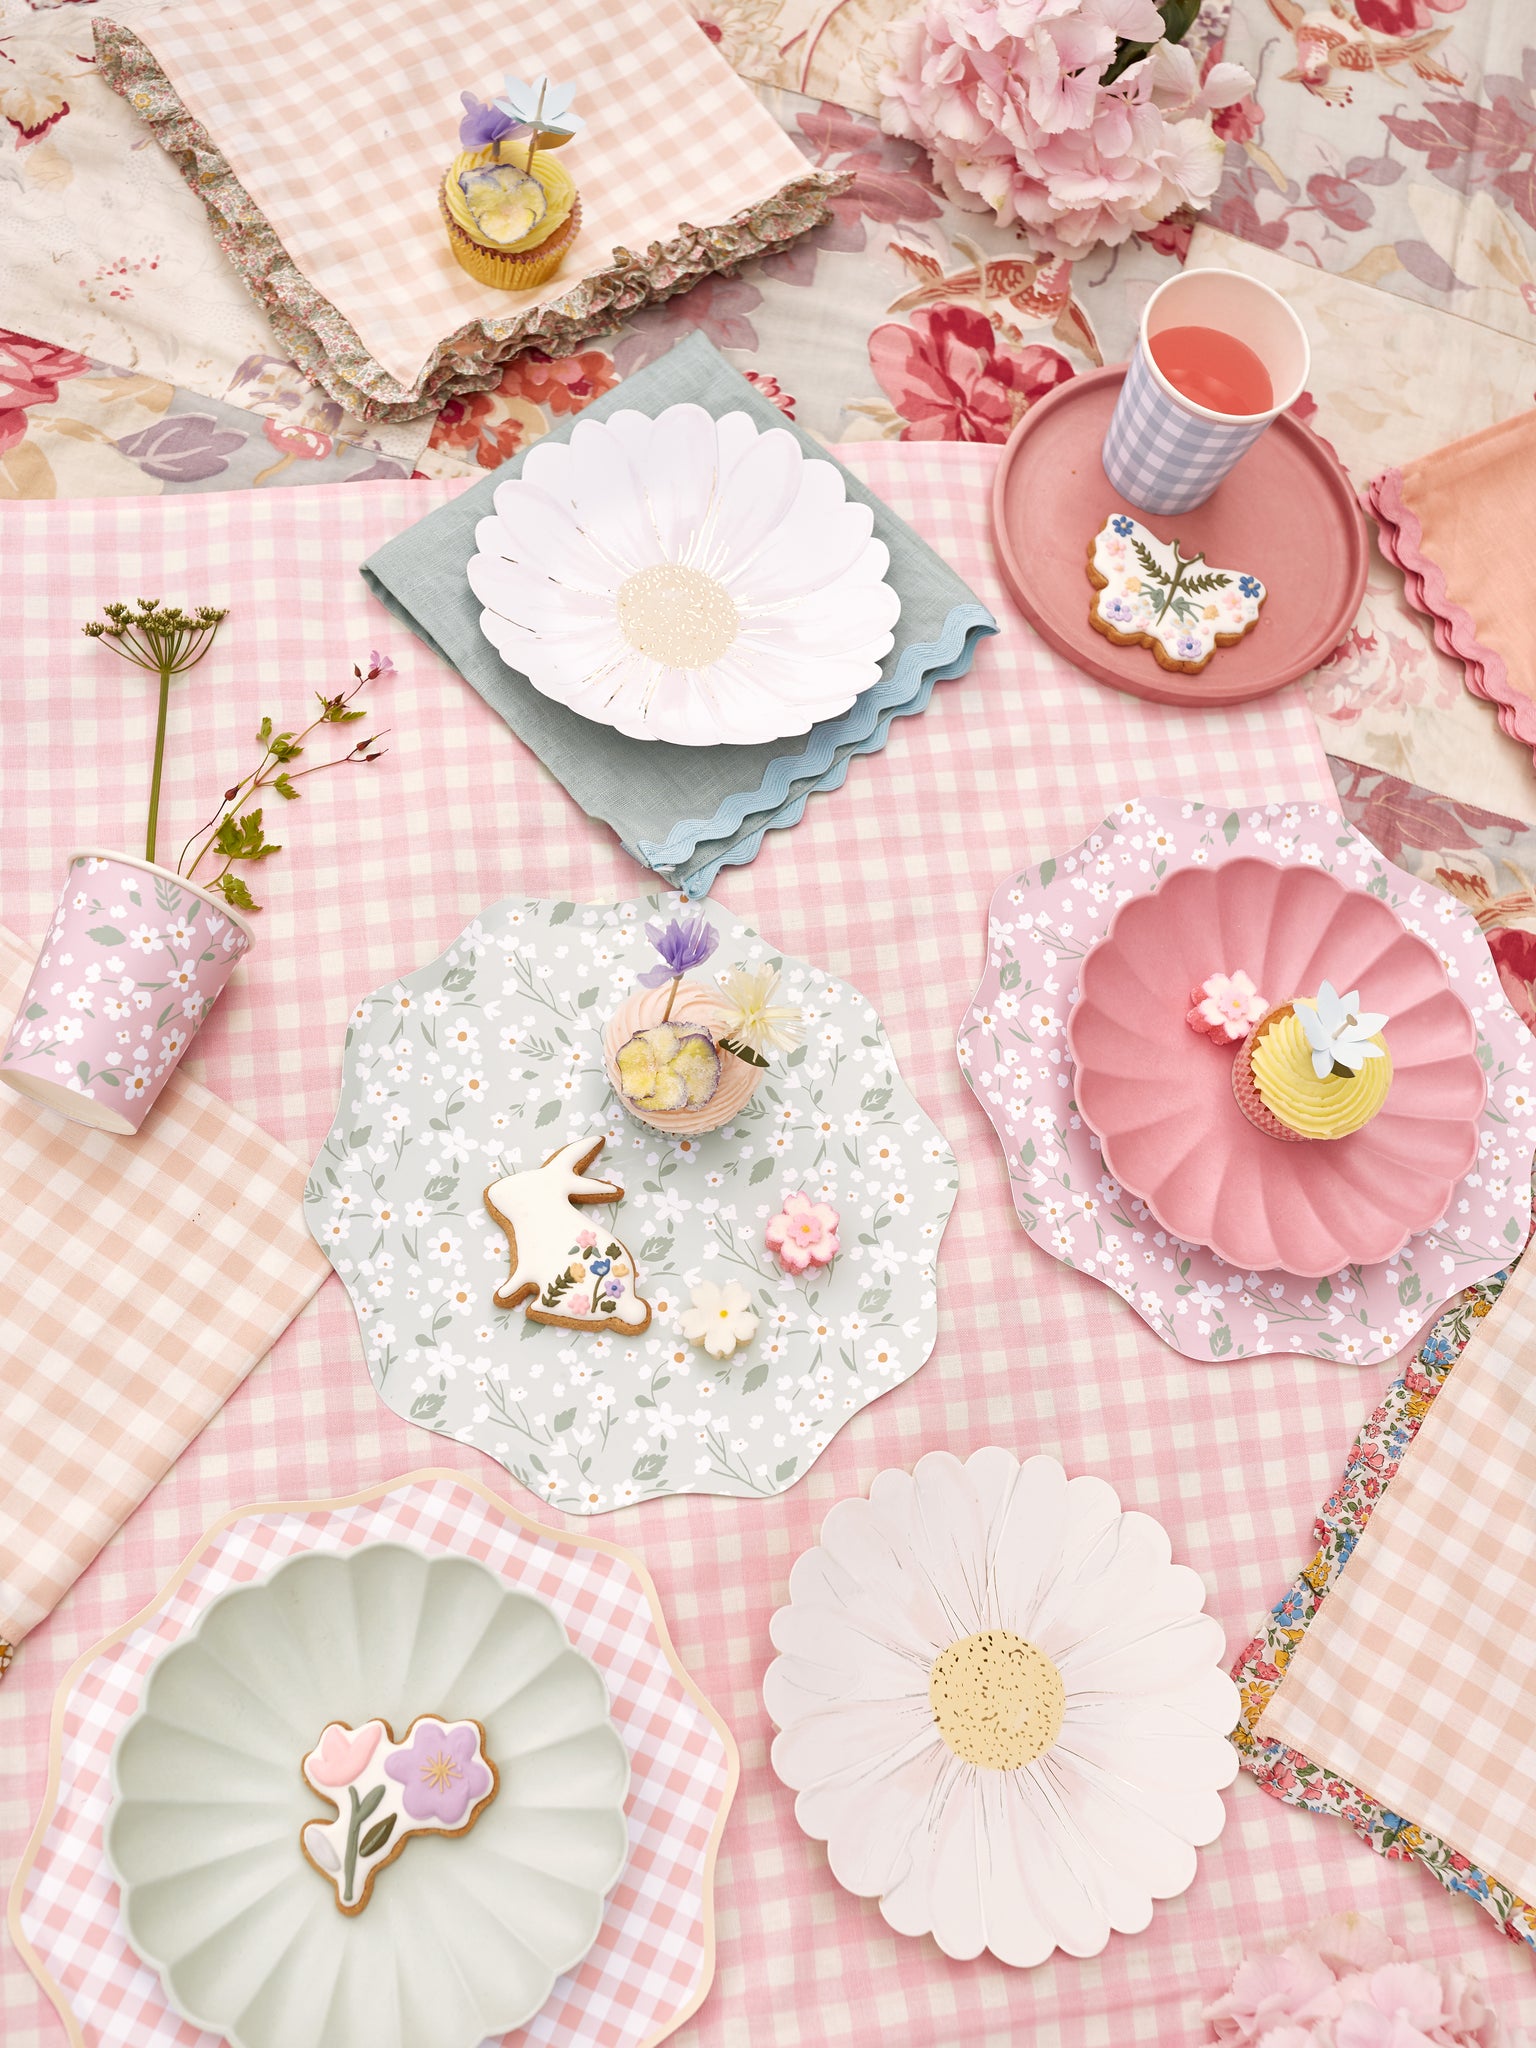 Daisy party supplies and pastel party supplies for a Spring tea party.